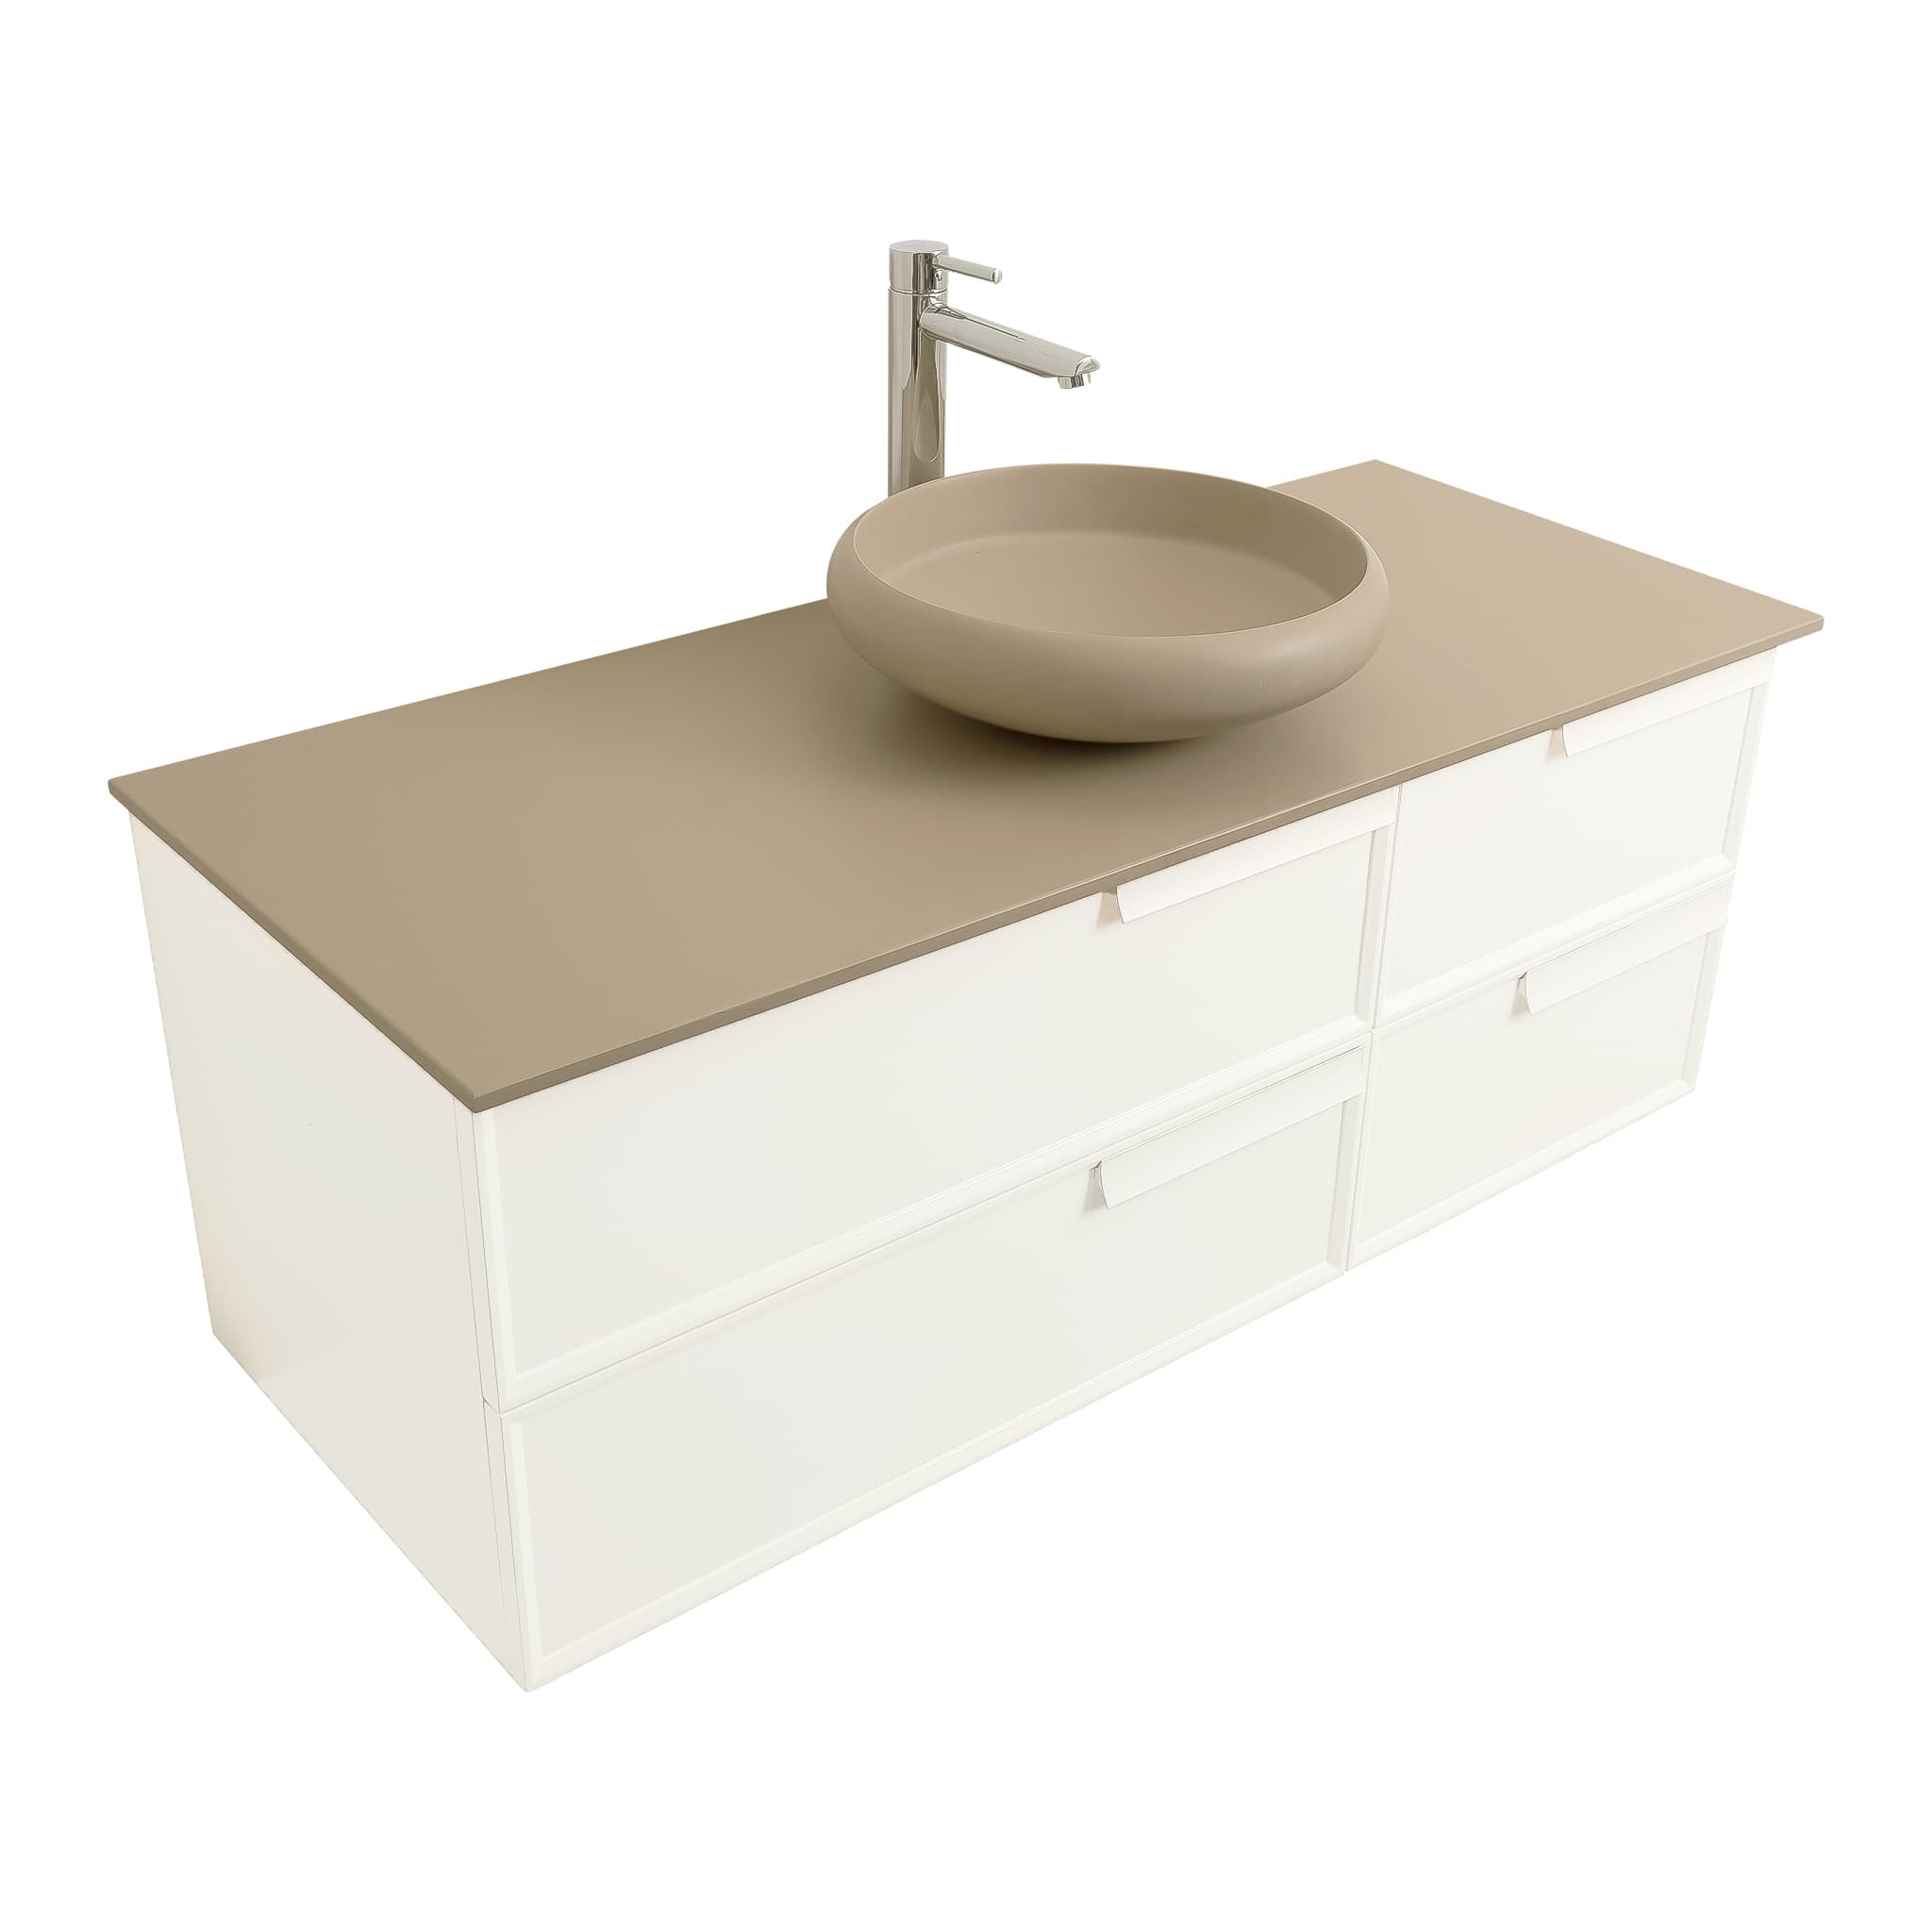 Garda 47.5 Matte White Cabinet, Solid Surface Flat Taupe Counter and Round Solid Surface Taupe Basin 1153, Wall Mounted Modern Vanity Set